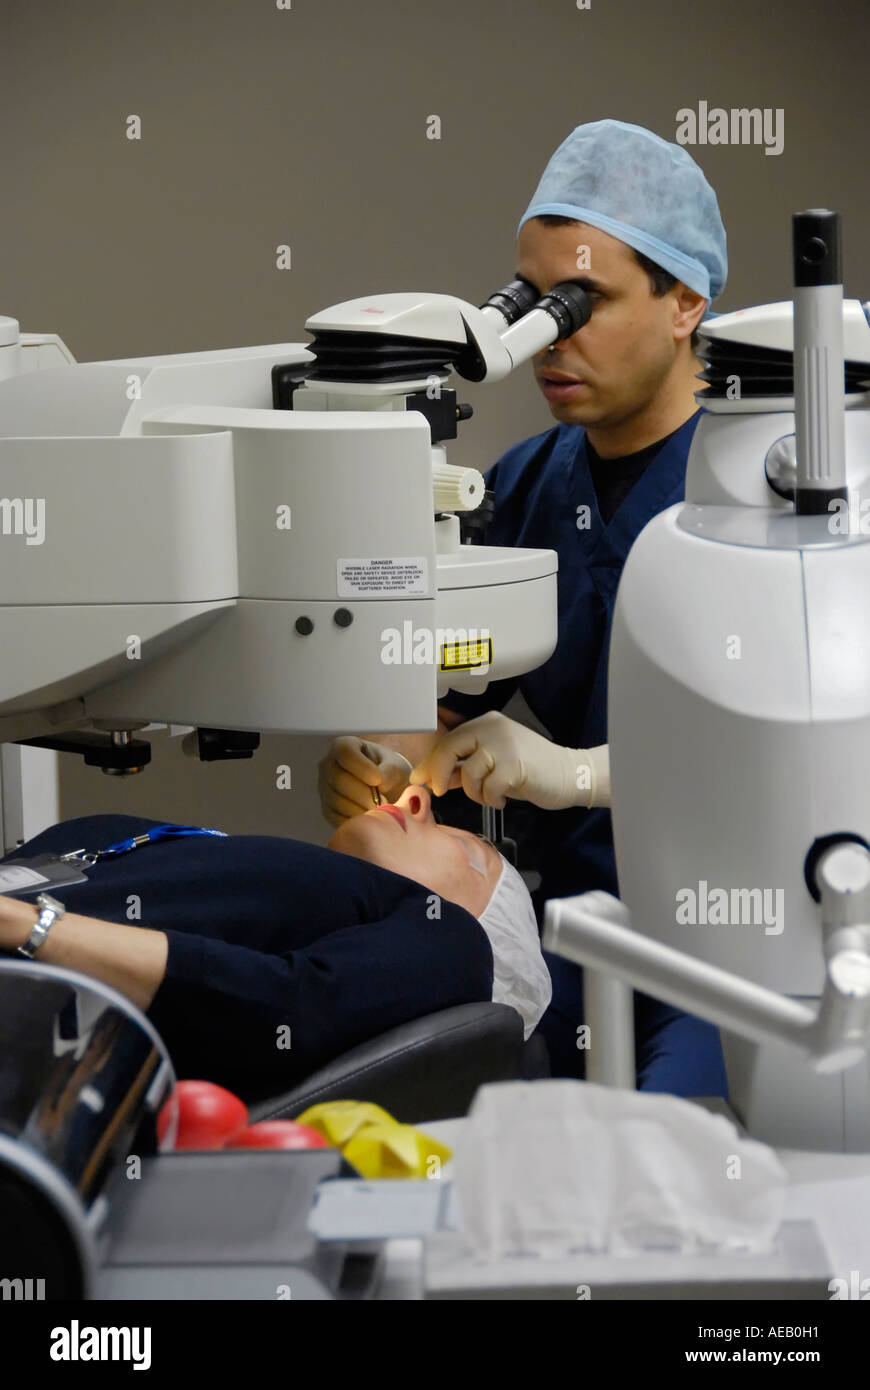 PRK and Lasik laser eye surgery is state of the art vision correction and surgical operation is performed at a laser eye center by a ophthalmologist Stock Photo